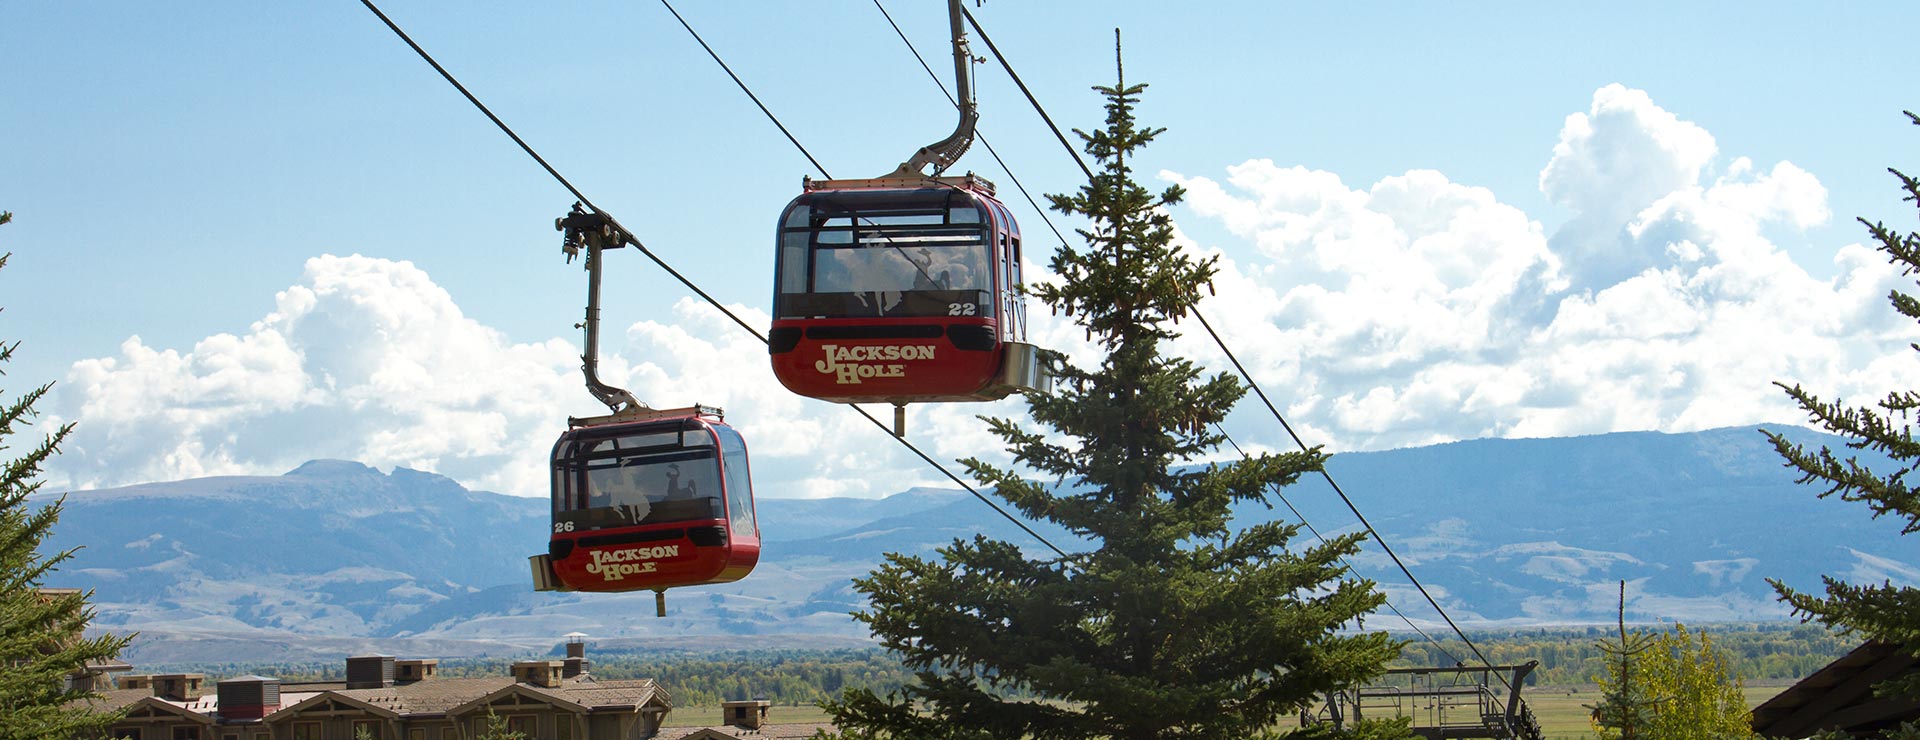 Jackson Hole Bridger Gondola on a partly cloudy day in the summer